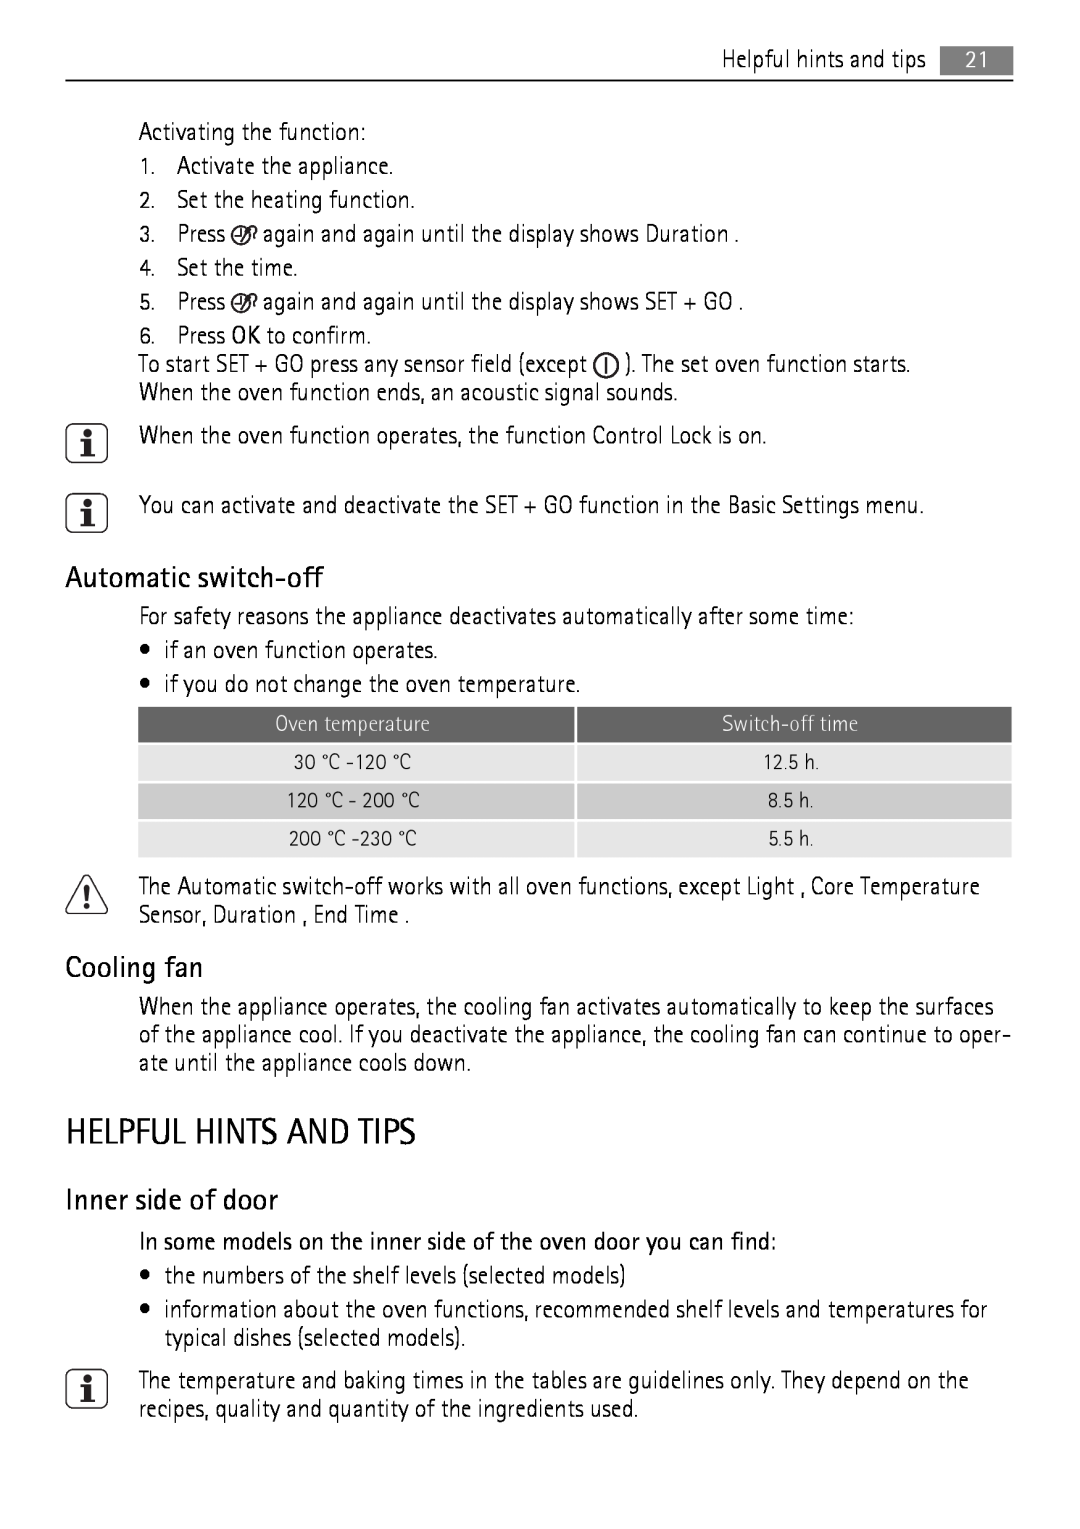 AEG BS9304001 user manual Helpful Hints And Tips, Automatic switch-off, Cooling fan, Inner side of door 